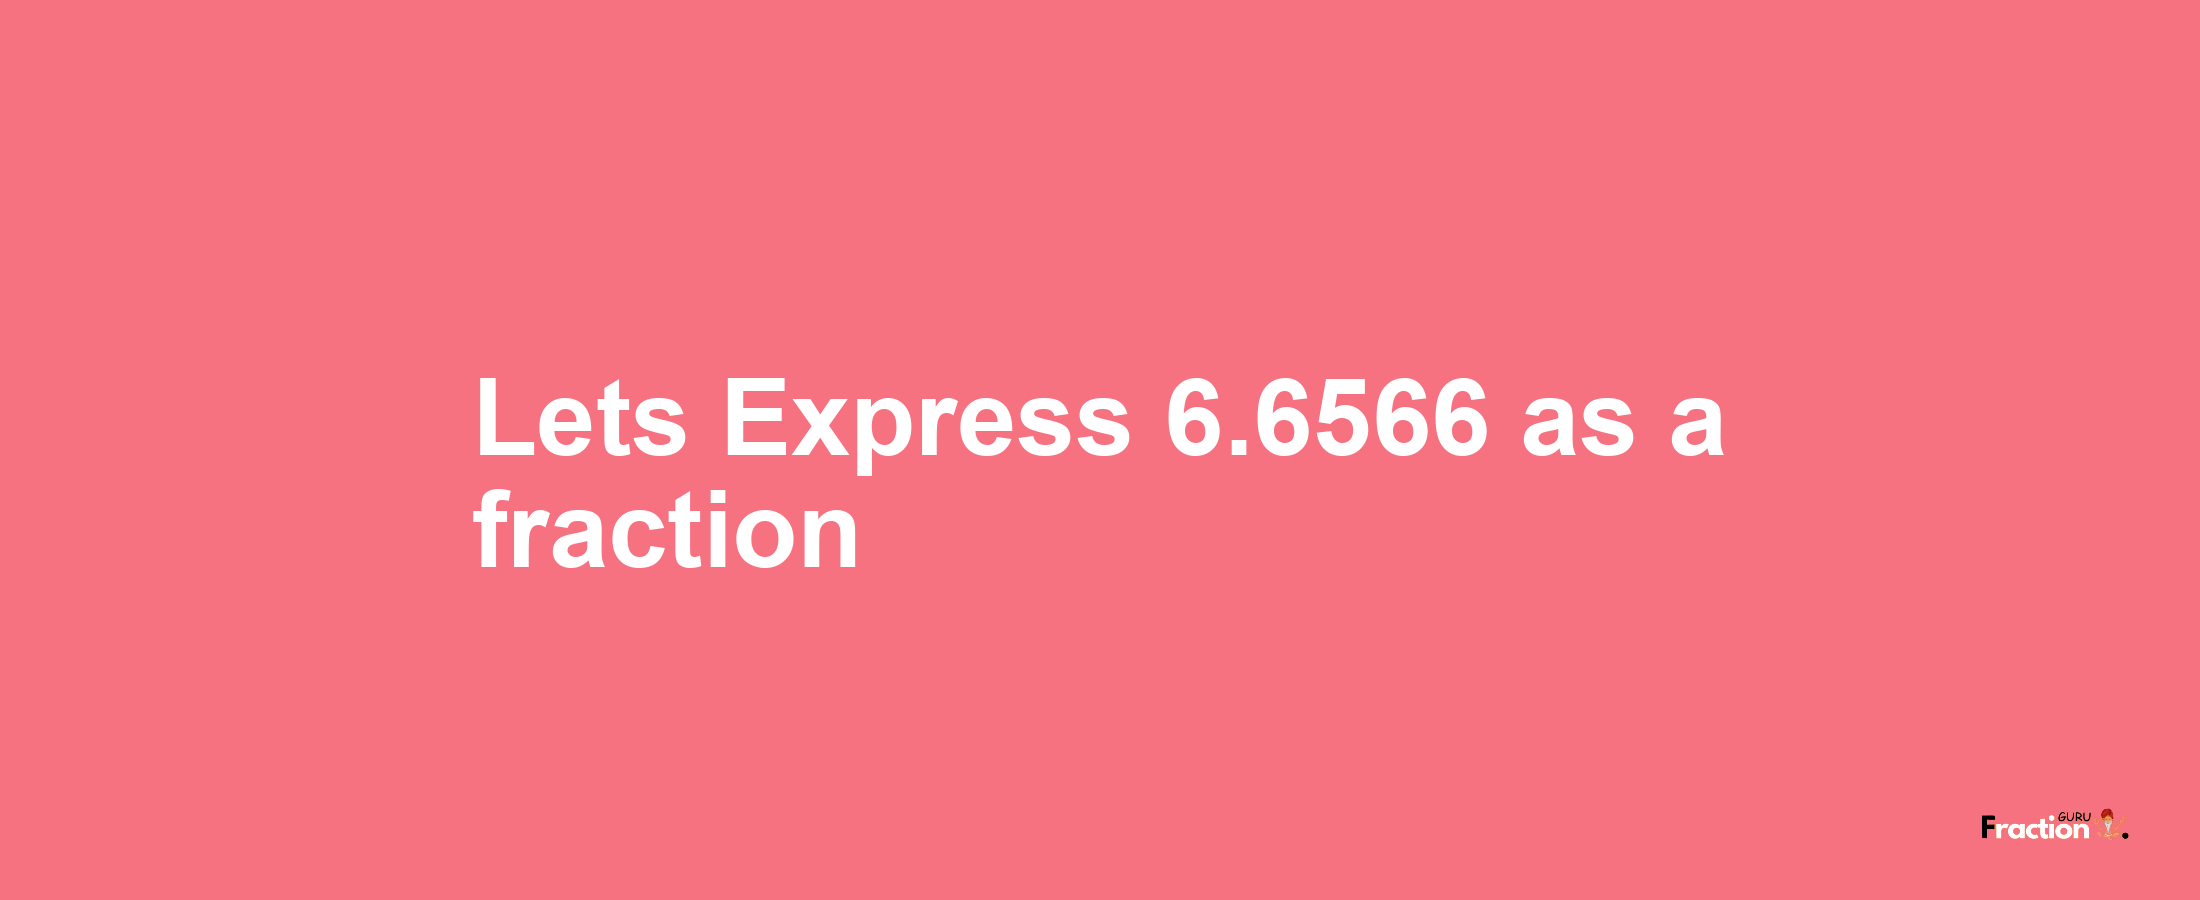 Lets Express 6.6566 as afraction